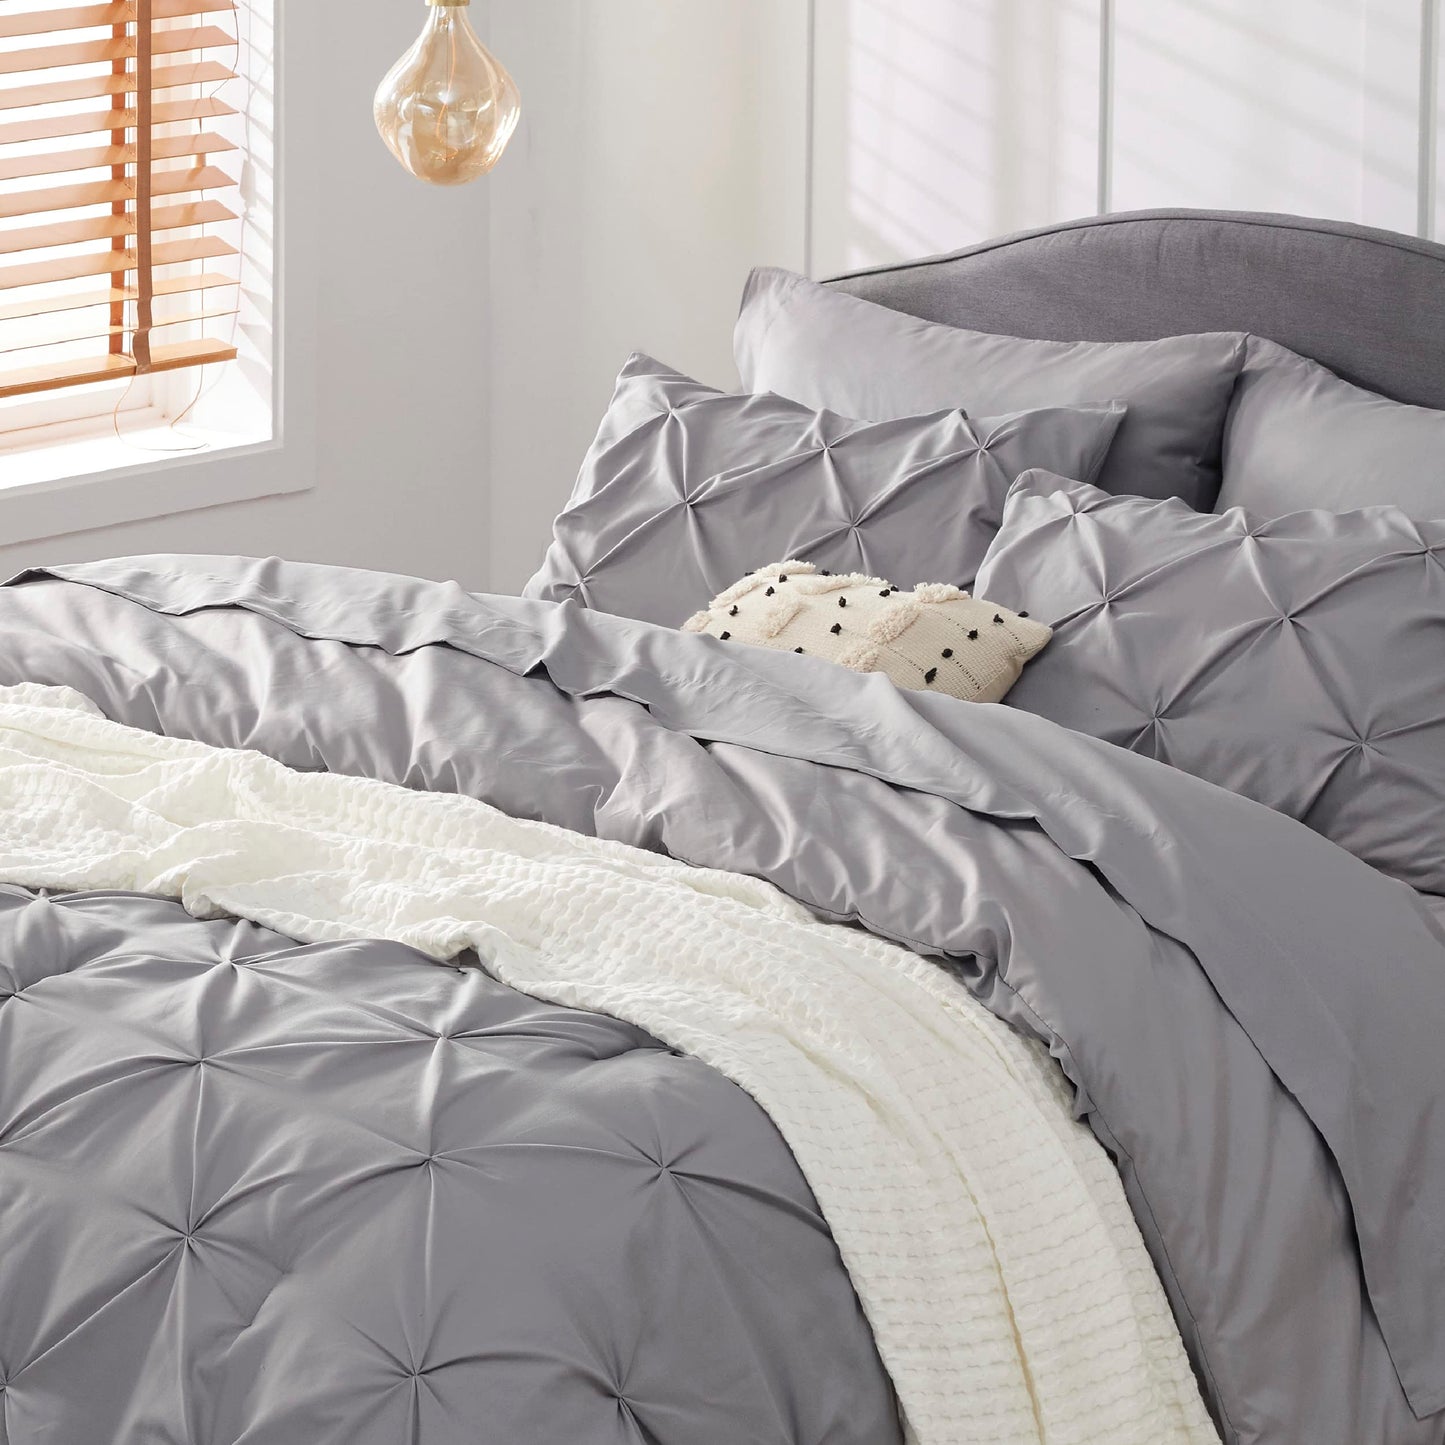 Bedsure Queen Comforter Set - 7 Pieces Comforters Queen Size Grey, Pintuck Bedding Sets Queen for All Season, Bed in a Bag with Flat Sheet and Fitted Sheet, Pillowcases & Shams